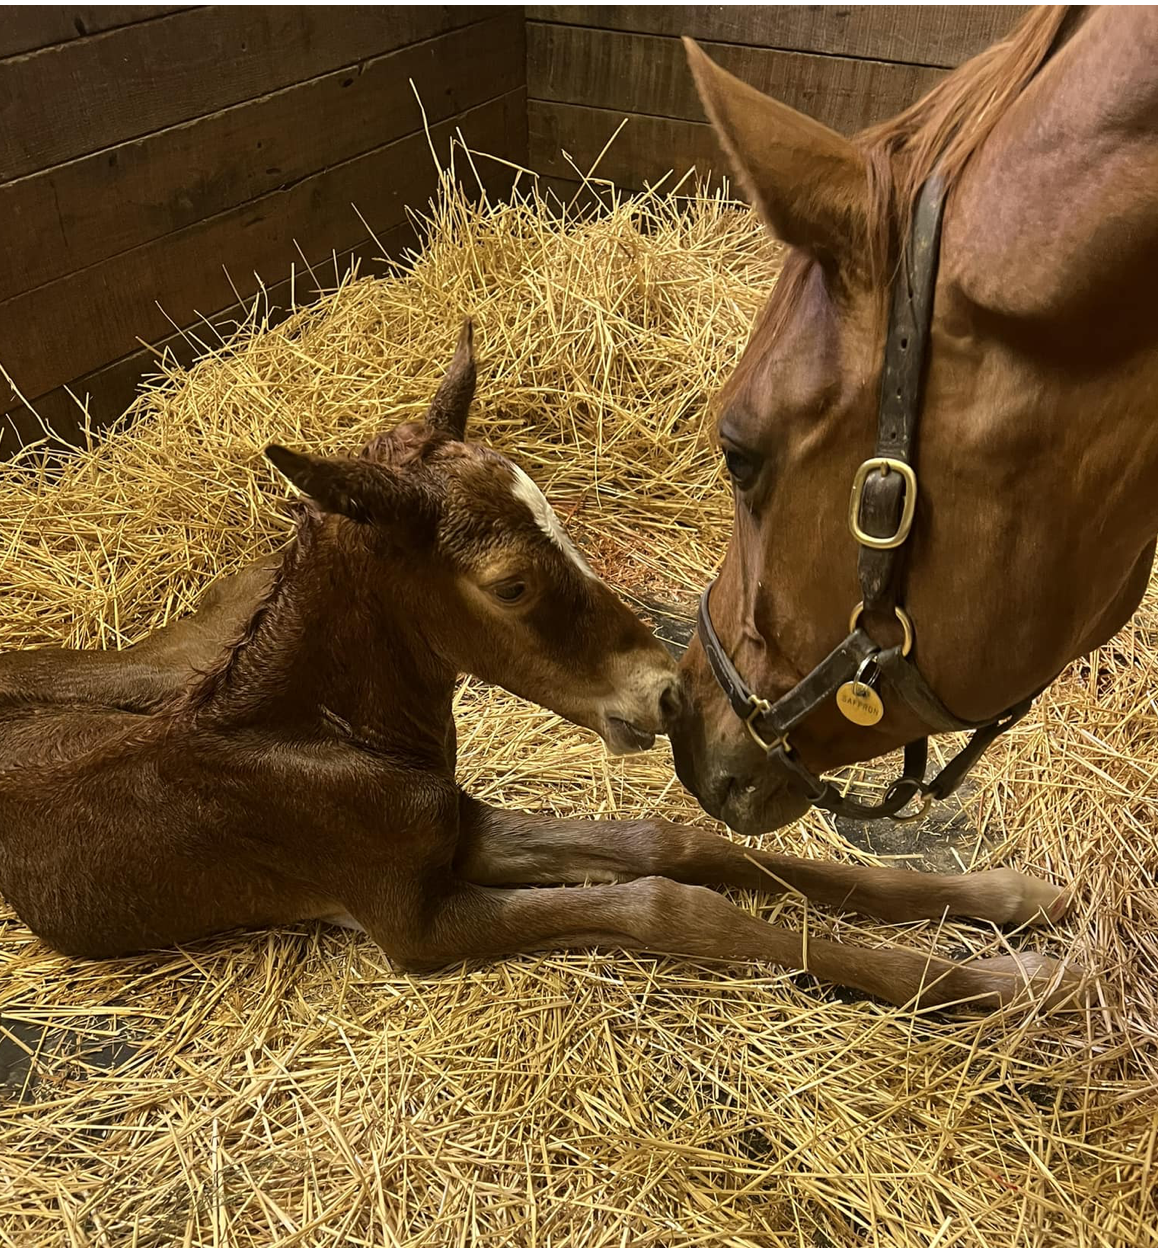 A 2023 Carrico colt born at Stone Columns Stables and owned by a client.